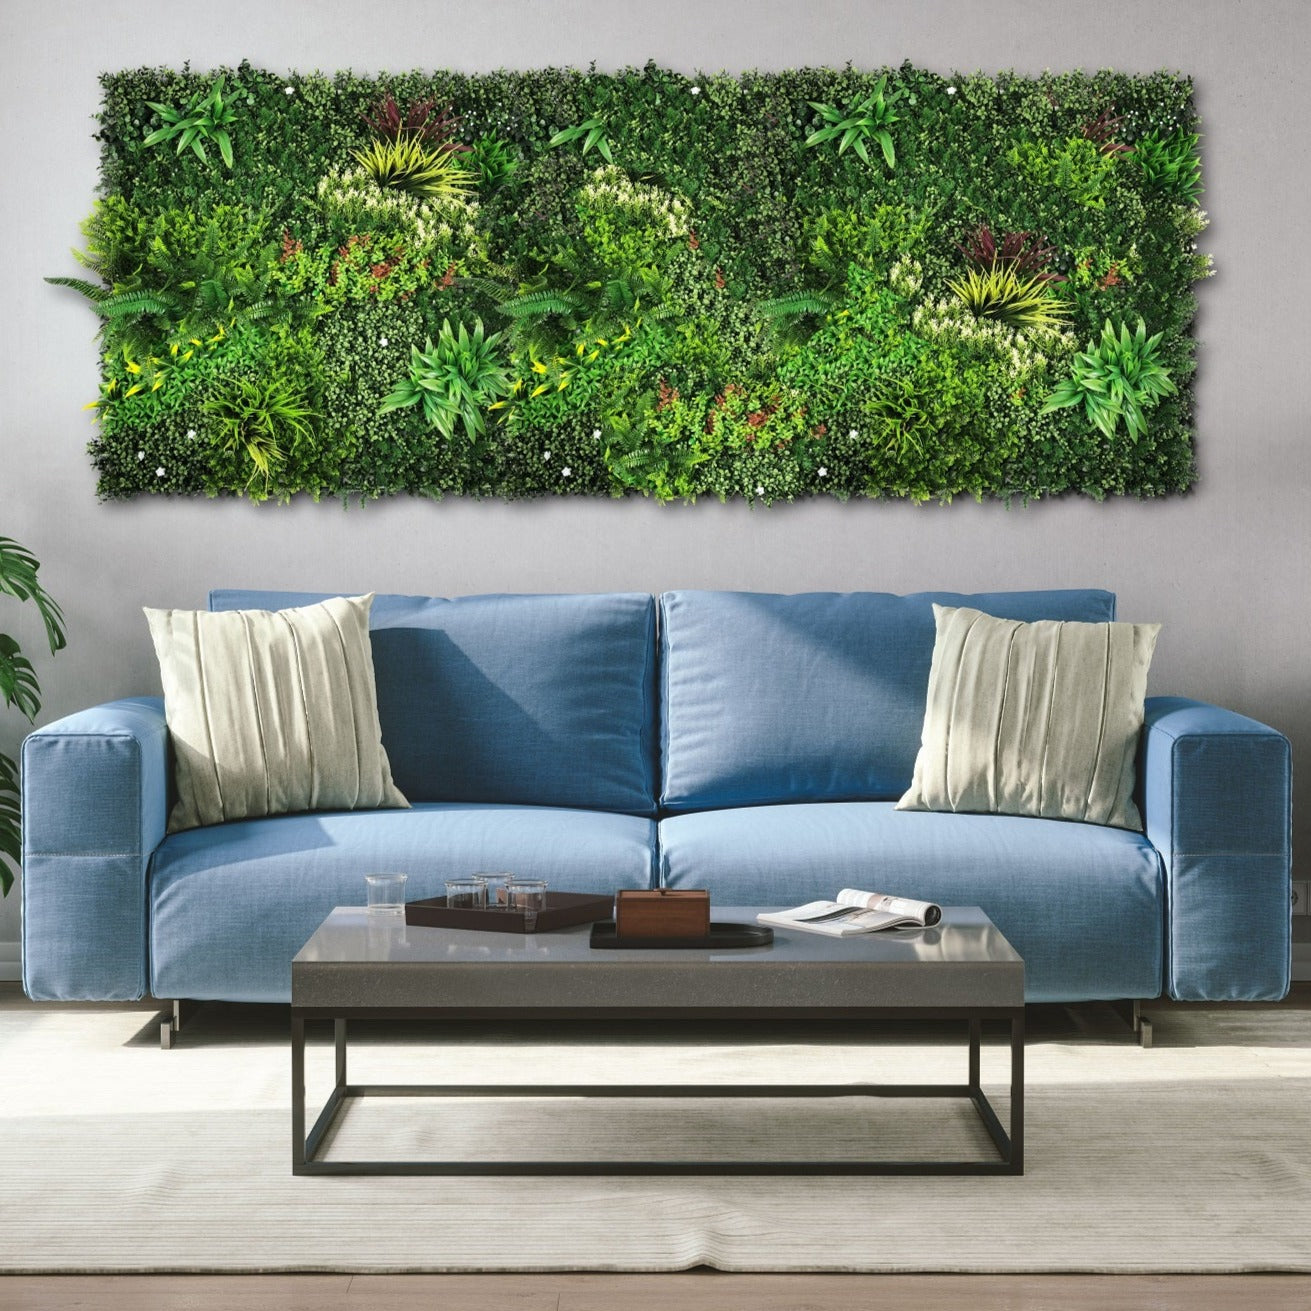 Colourful Blooms' Artificial Plant Wall Panel